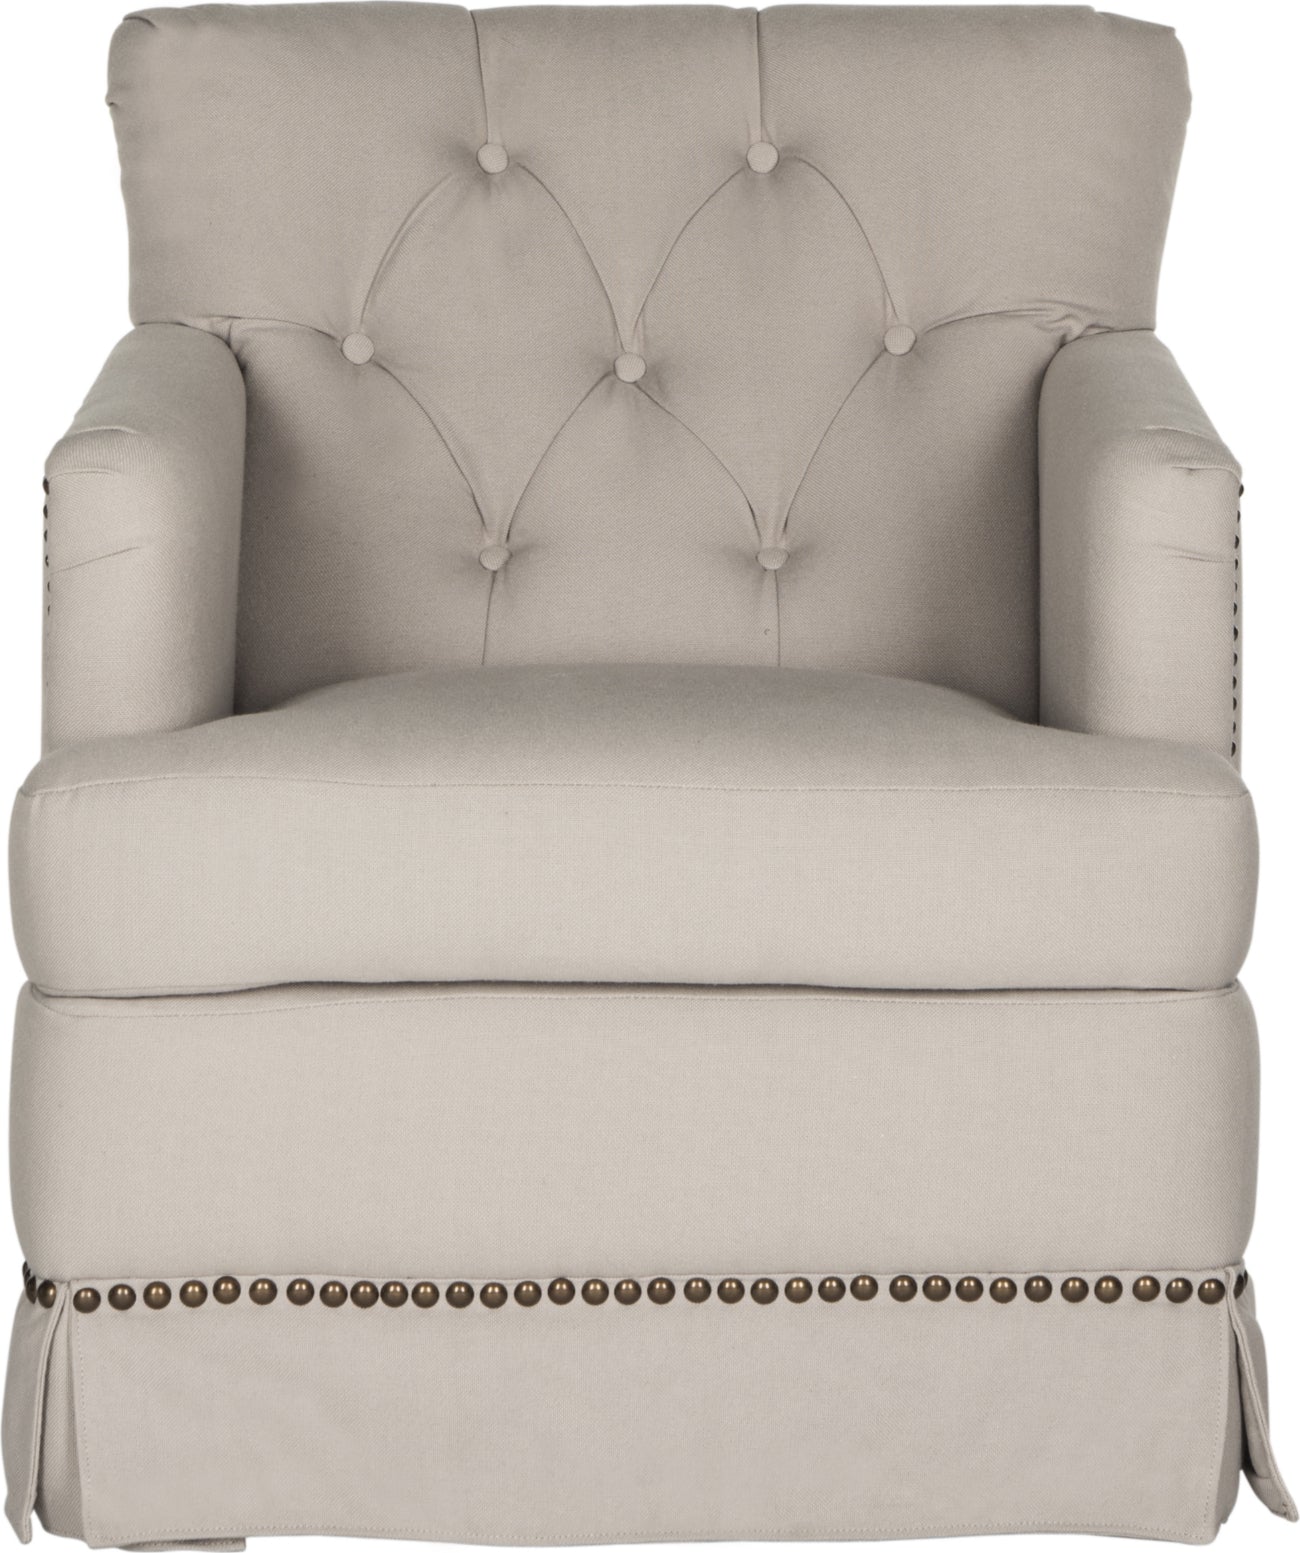 Safavieh Millicent Swivel Accent Chair-Brass Nail Heads Taupe Furniture main image